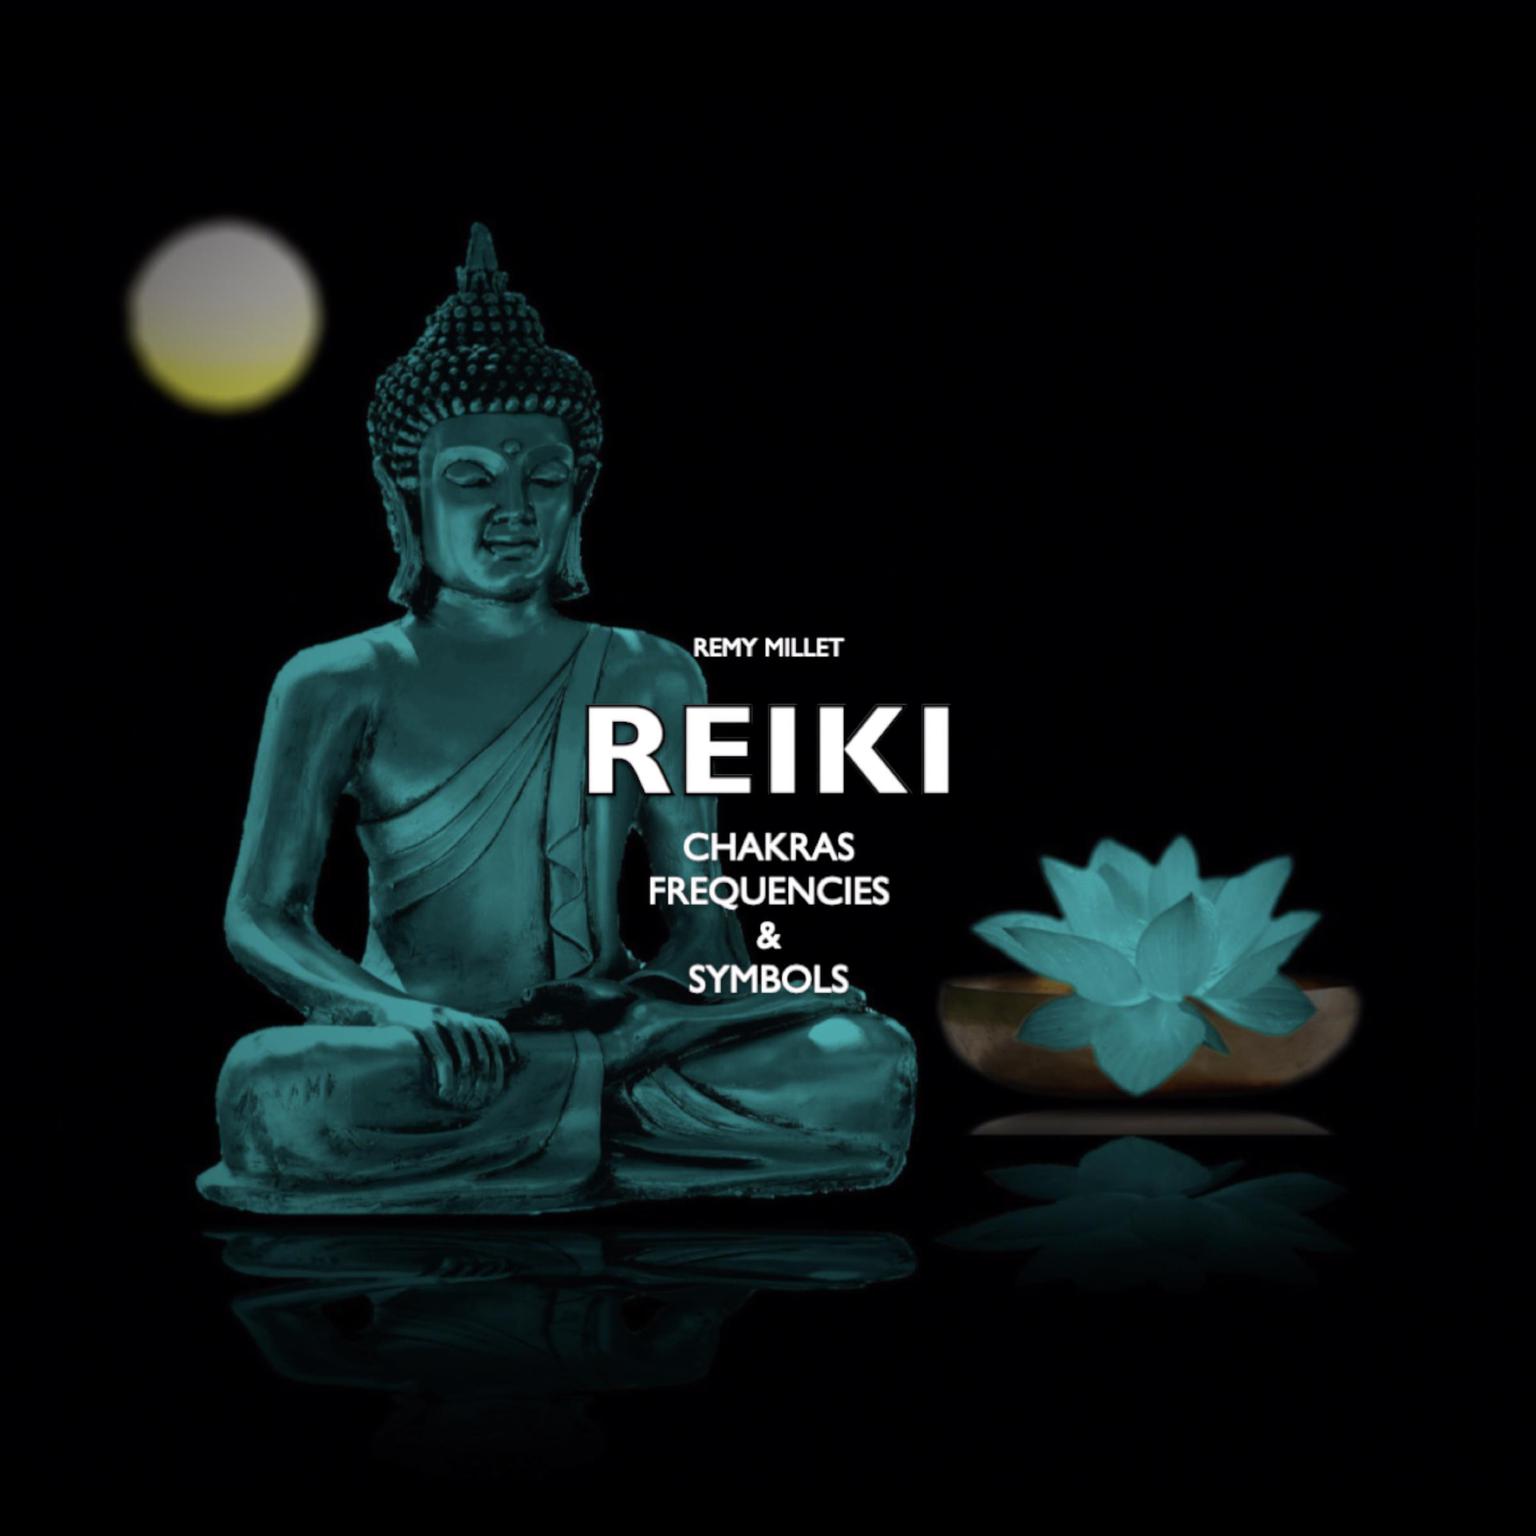 Reiki (Abridged): Chakras, Frequencies and Symbols Audiobook, by Remy Millet